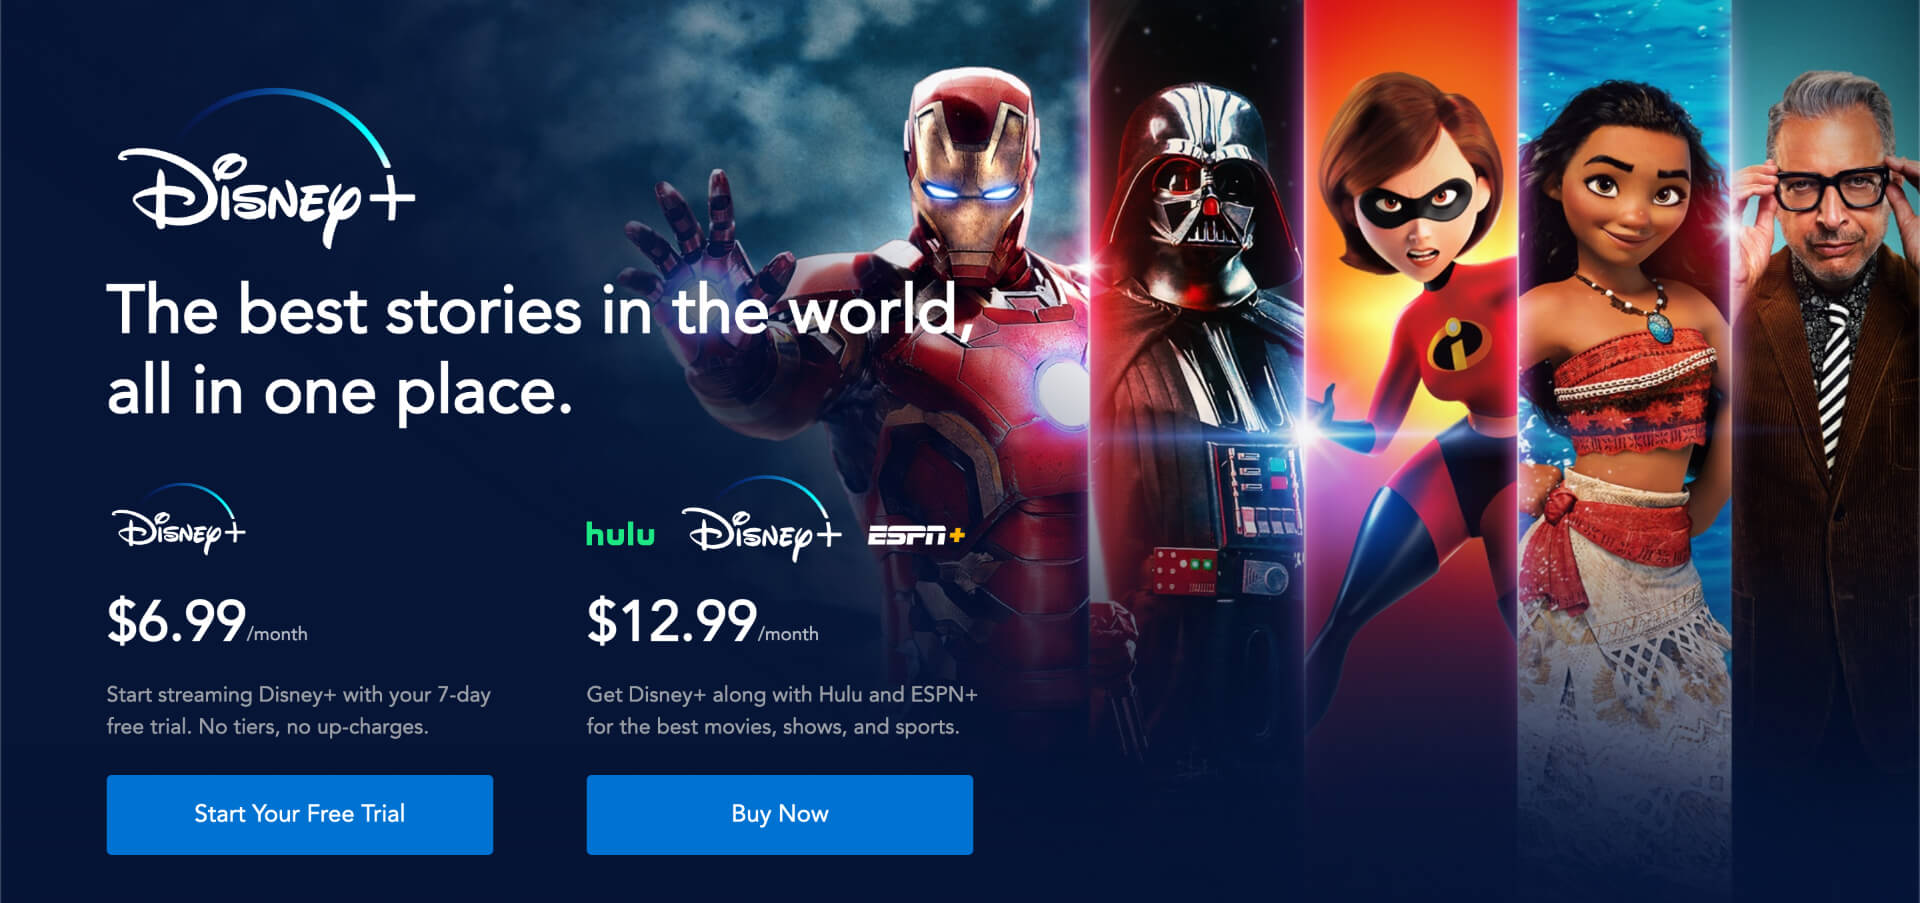 Is Disney Plus Worth It? Why The $12.99 Disney+ Bundle With Hulu And